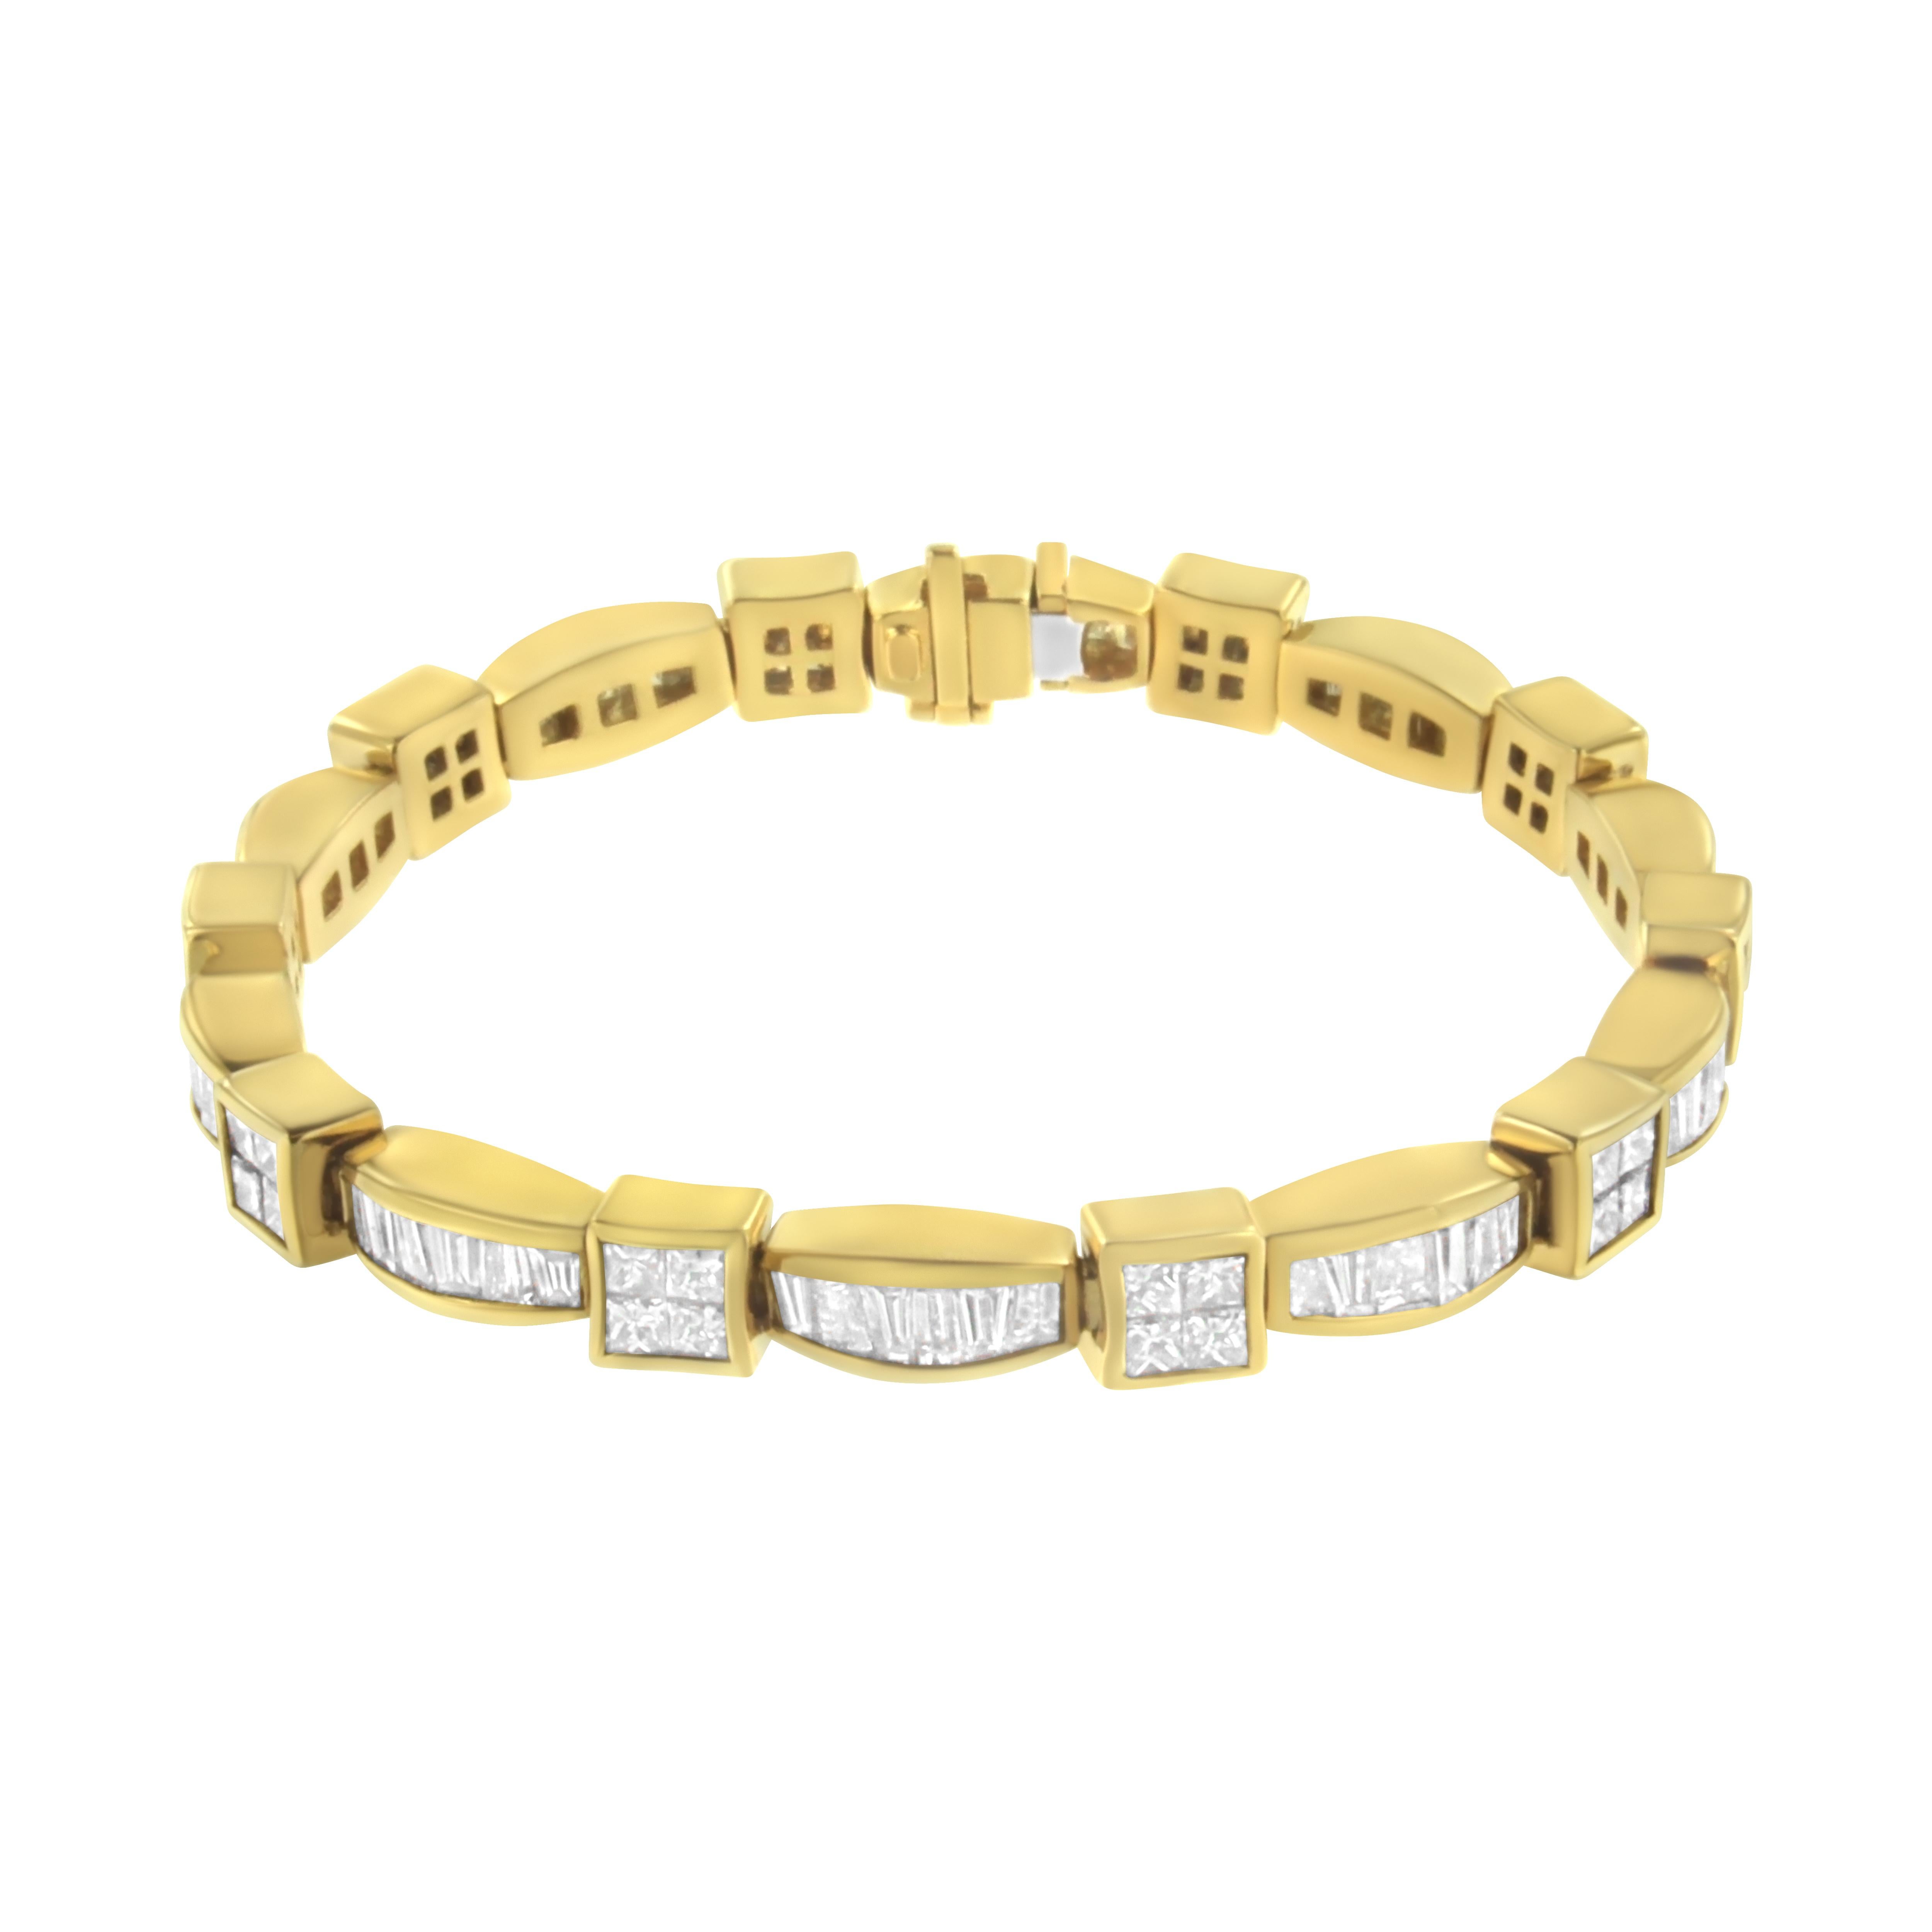 At the height of style, this 14 karat yellow gold bracelet plays with texture, flaunting sleek, shapely links that glisten with over 8 carats of glamorous princess cut and baguette diamonds. Makes a sparkling surprise for your favorite fashionista.